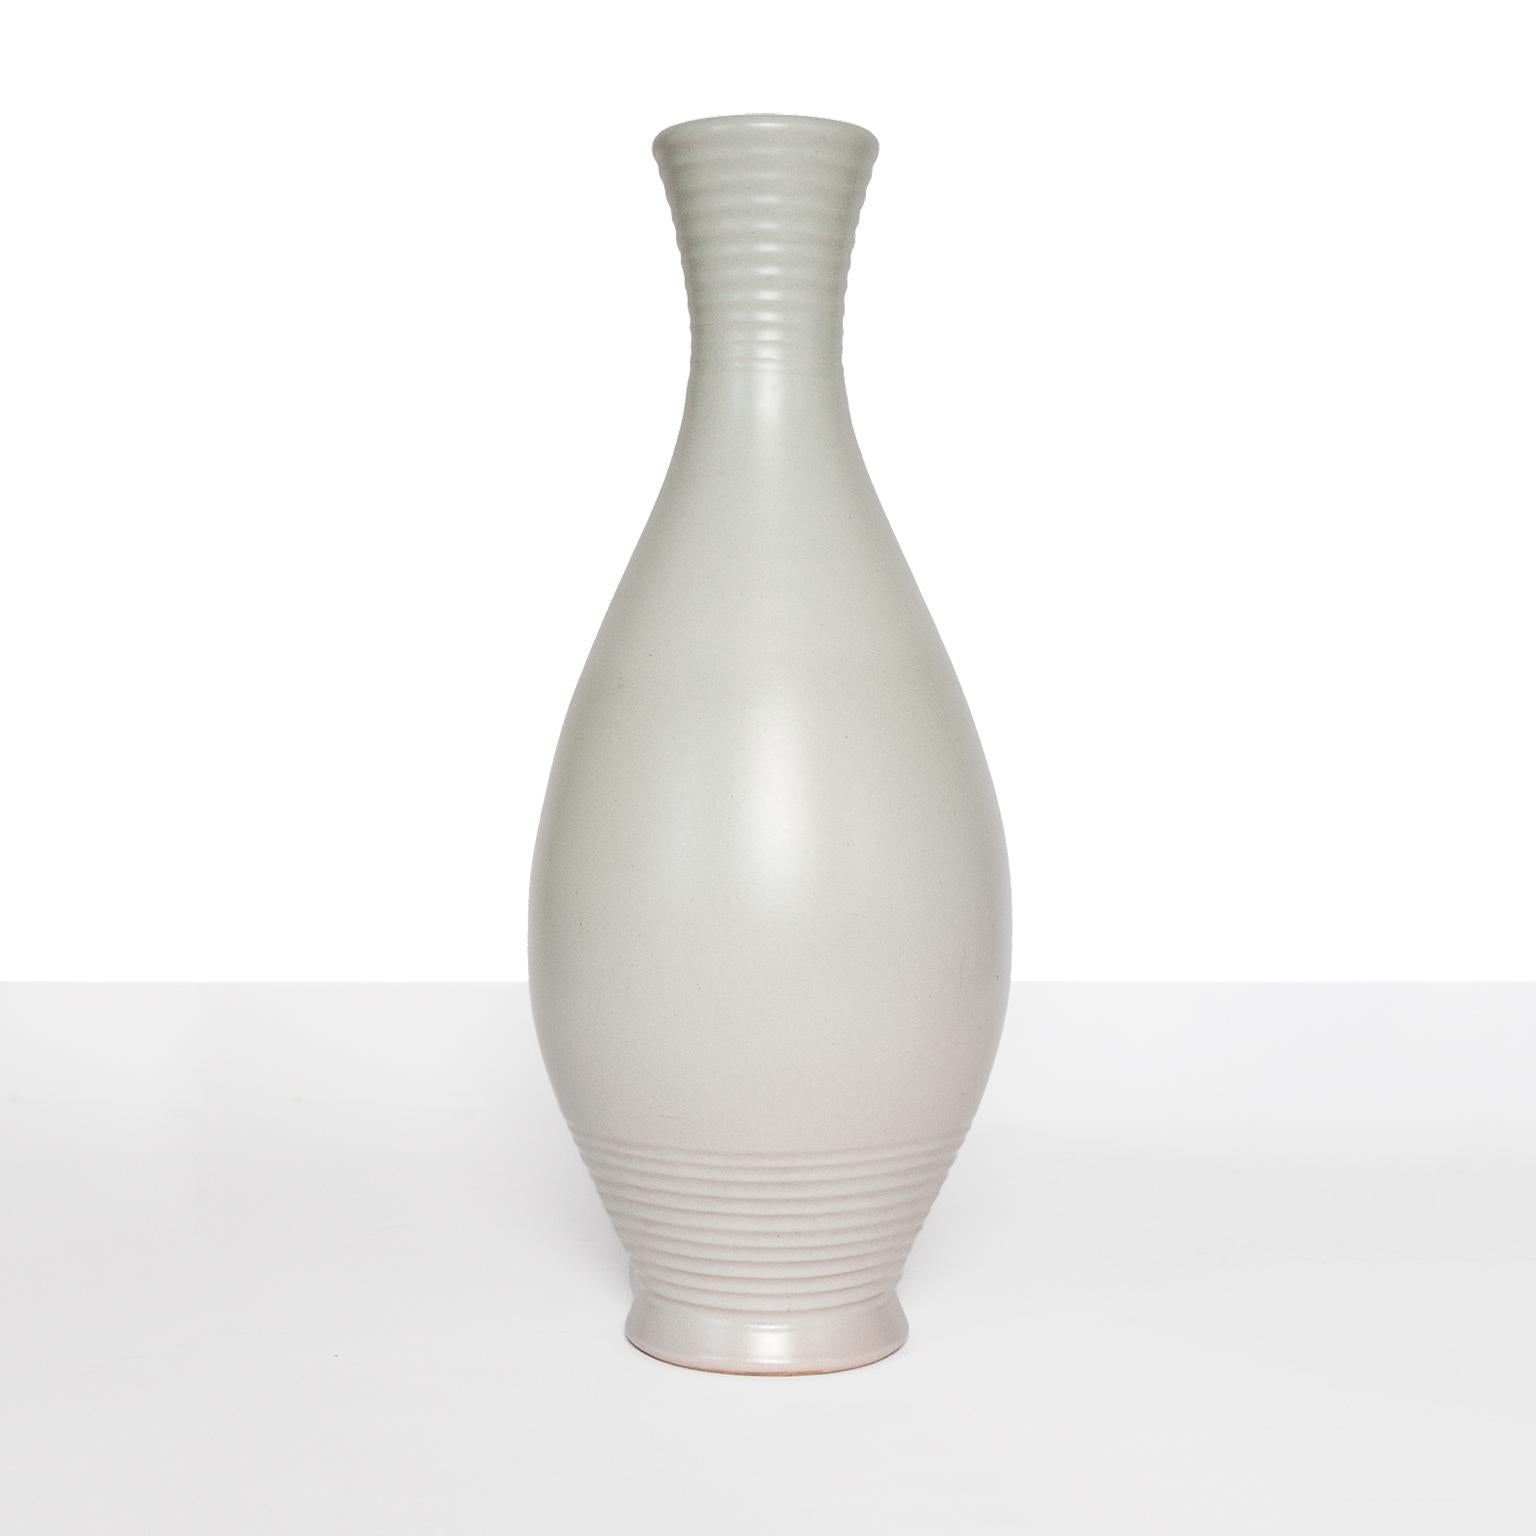 A large Swedish Art Deco vases by artist Ewald Dahlskog for Bo Fajans. This piece is unique and glazed in a soft gray color. Measures: Height 20